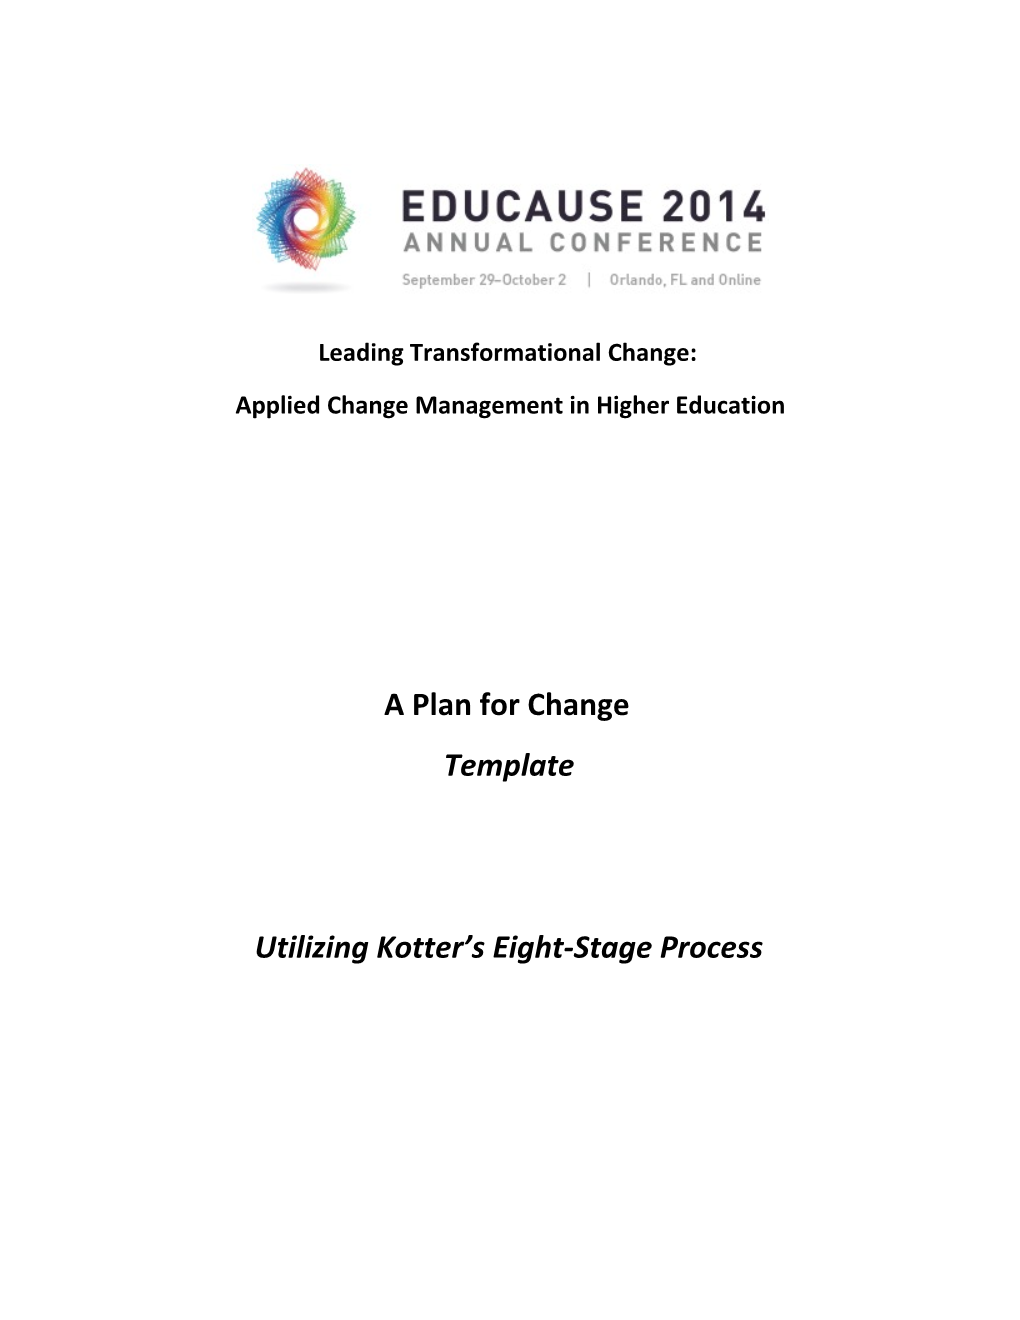 Applied Change Management in Higher Education